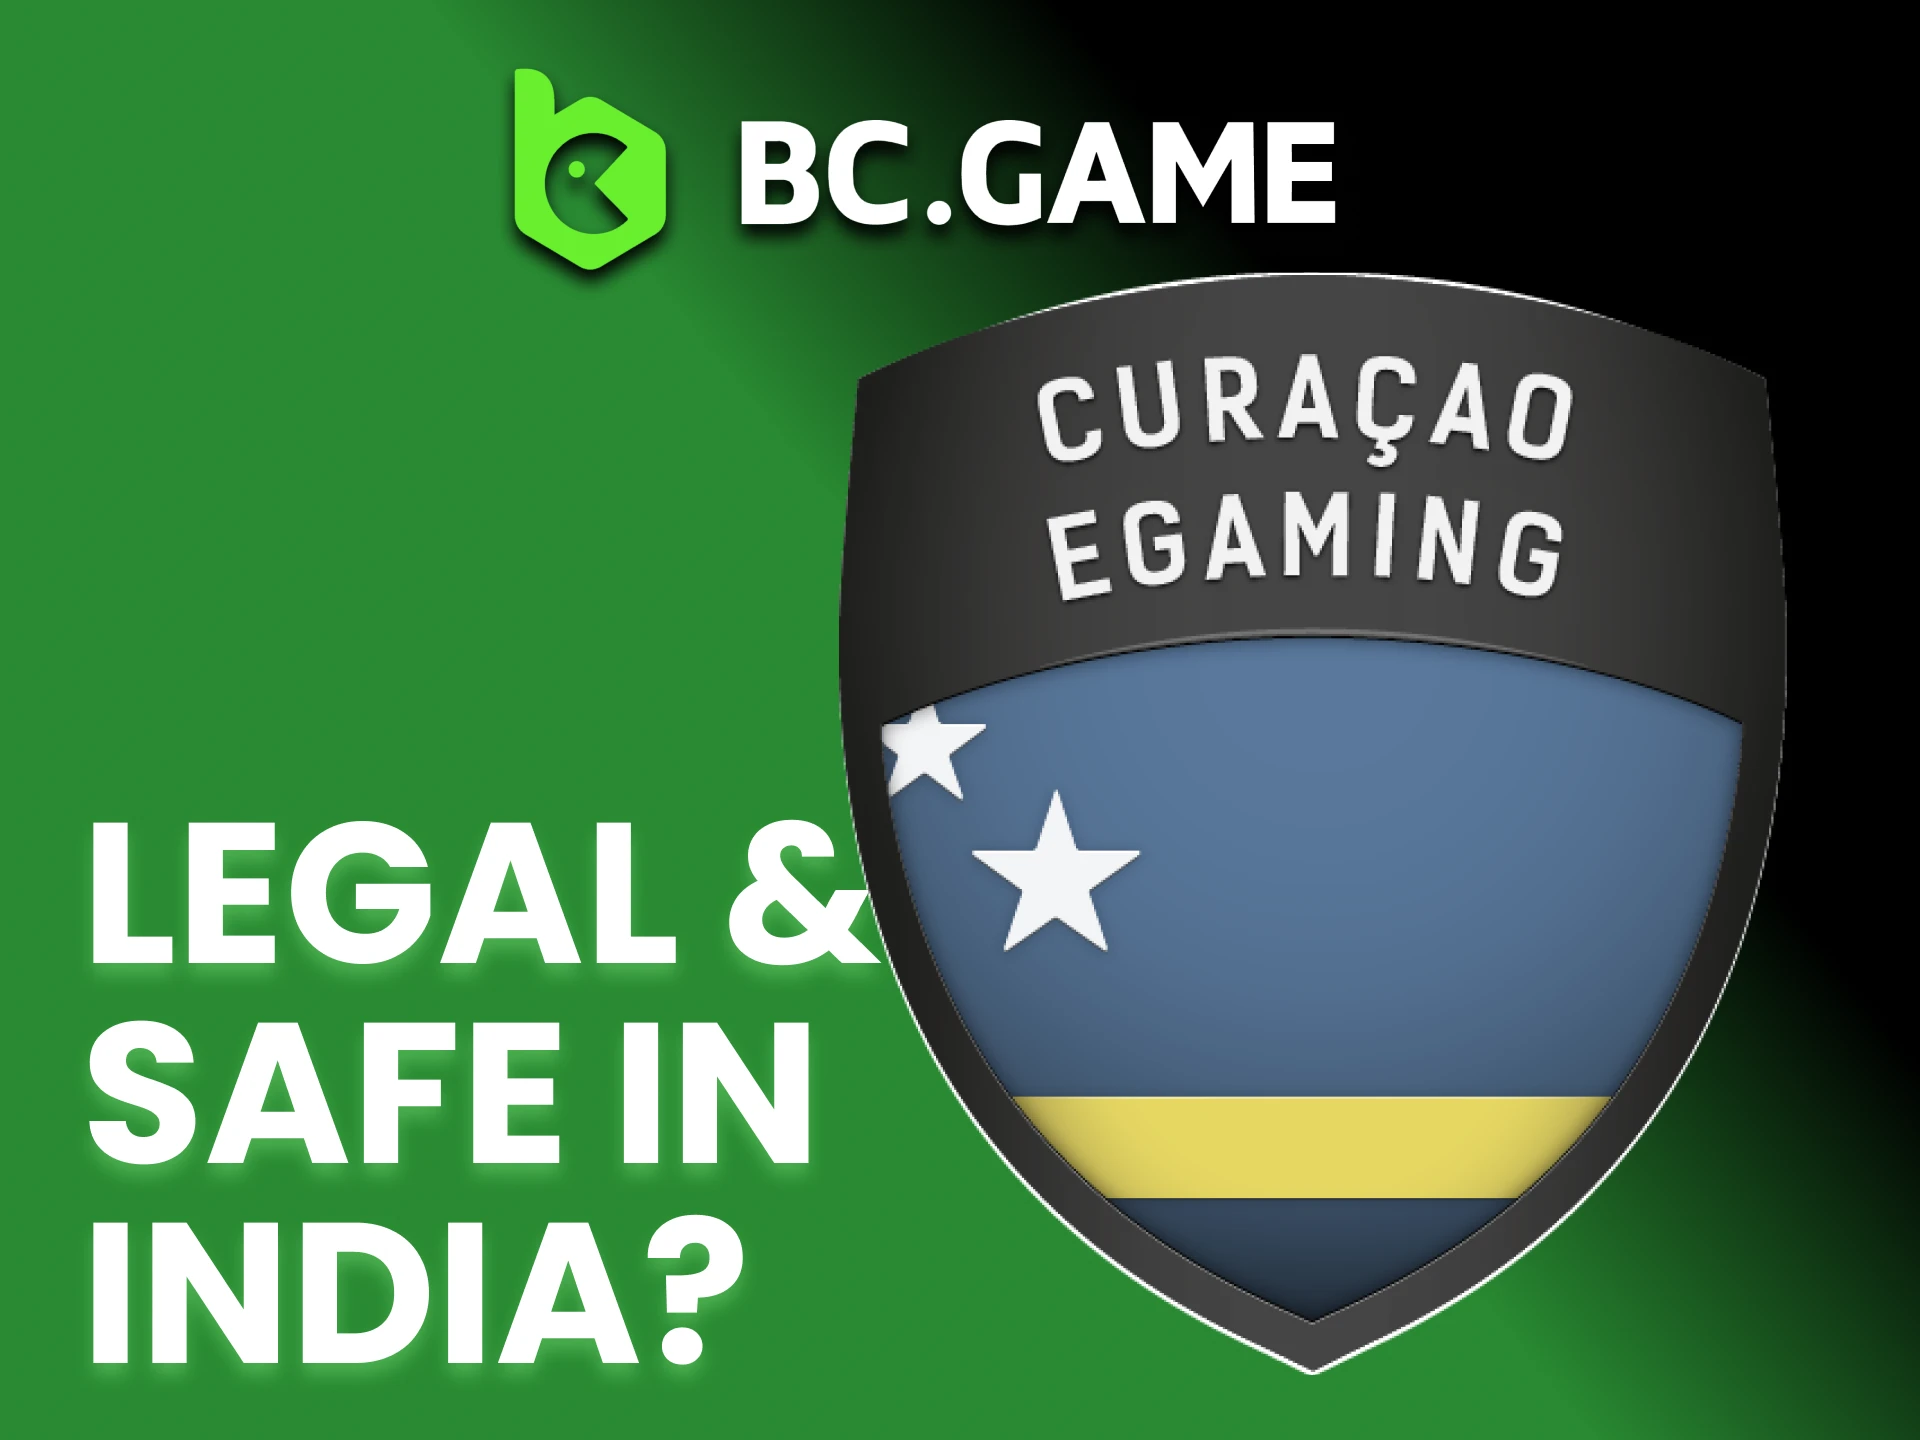 BC Game is fully legal in India.